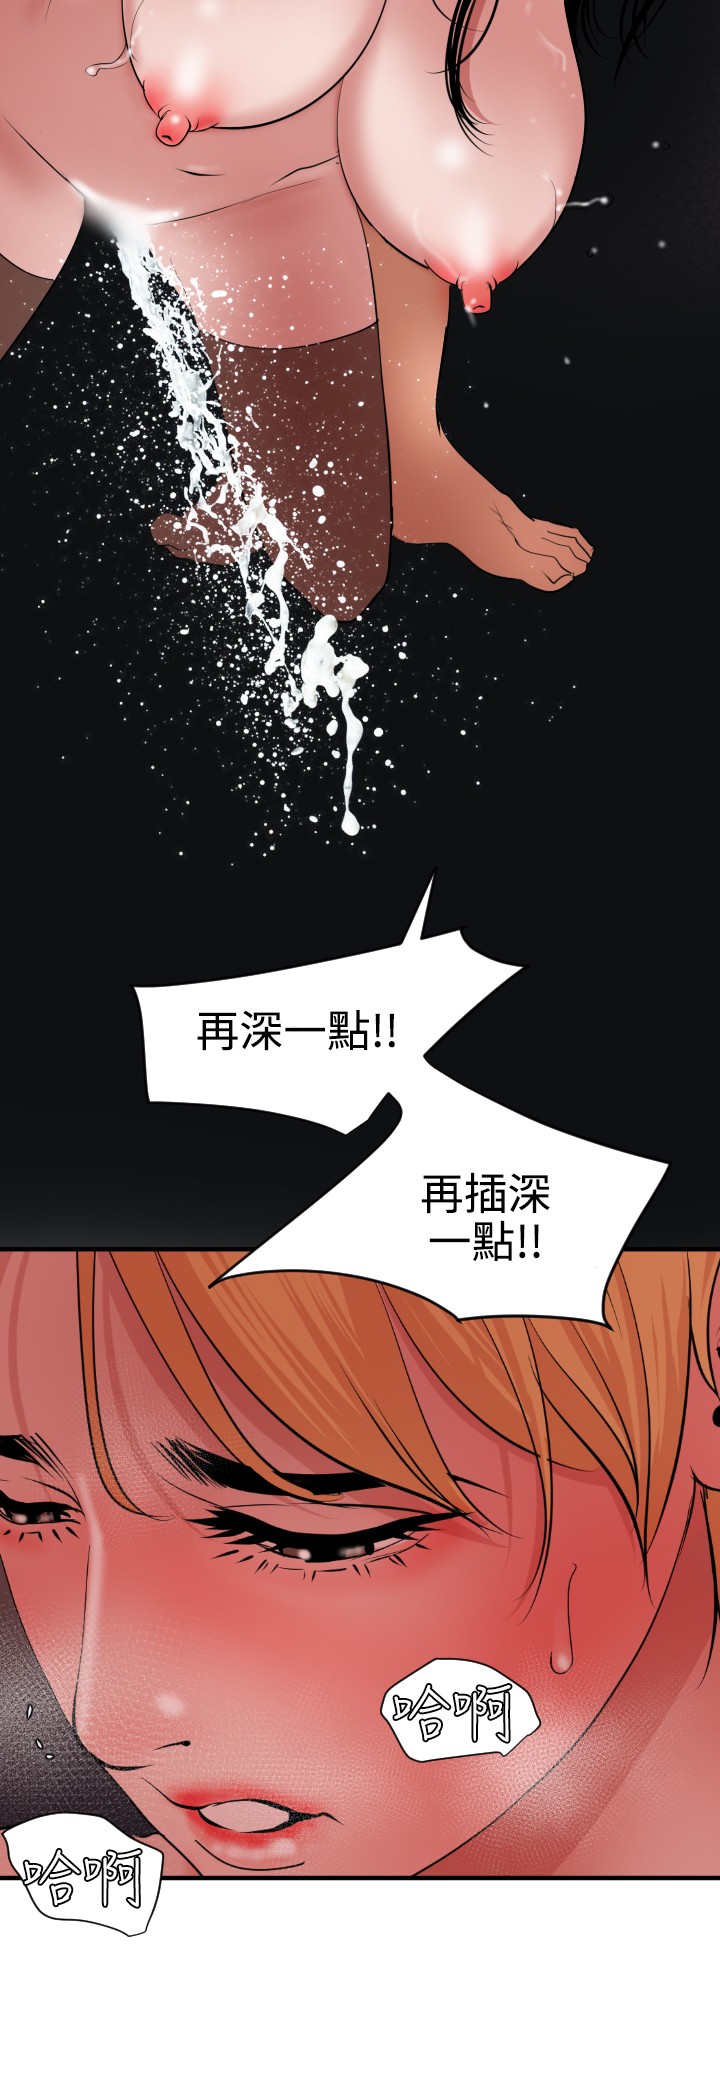 Desire King 欲求王 Ch.41~51 [Chinese] [黑嘿嘿] 慾求王